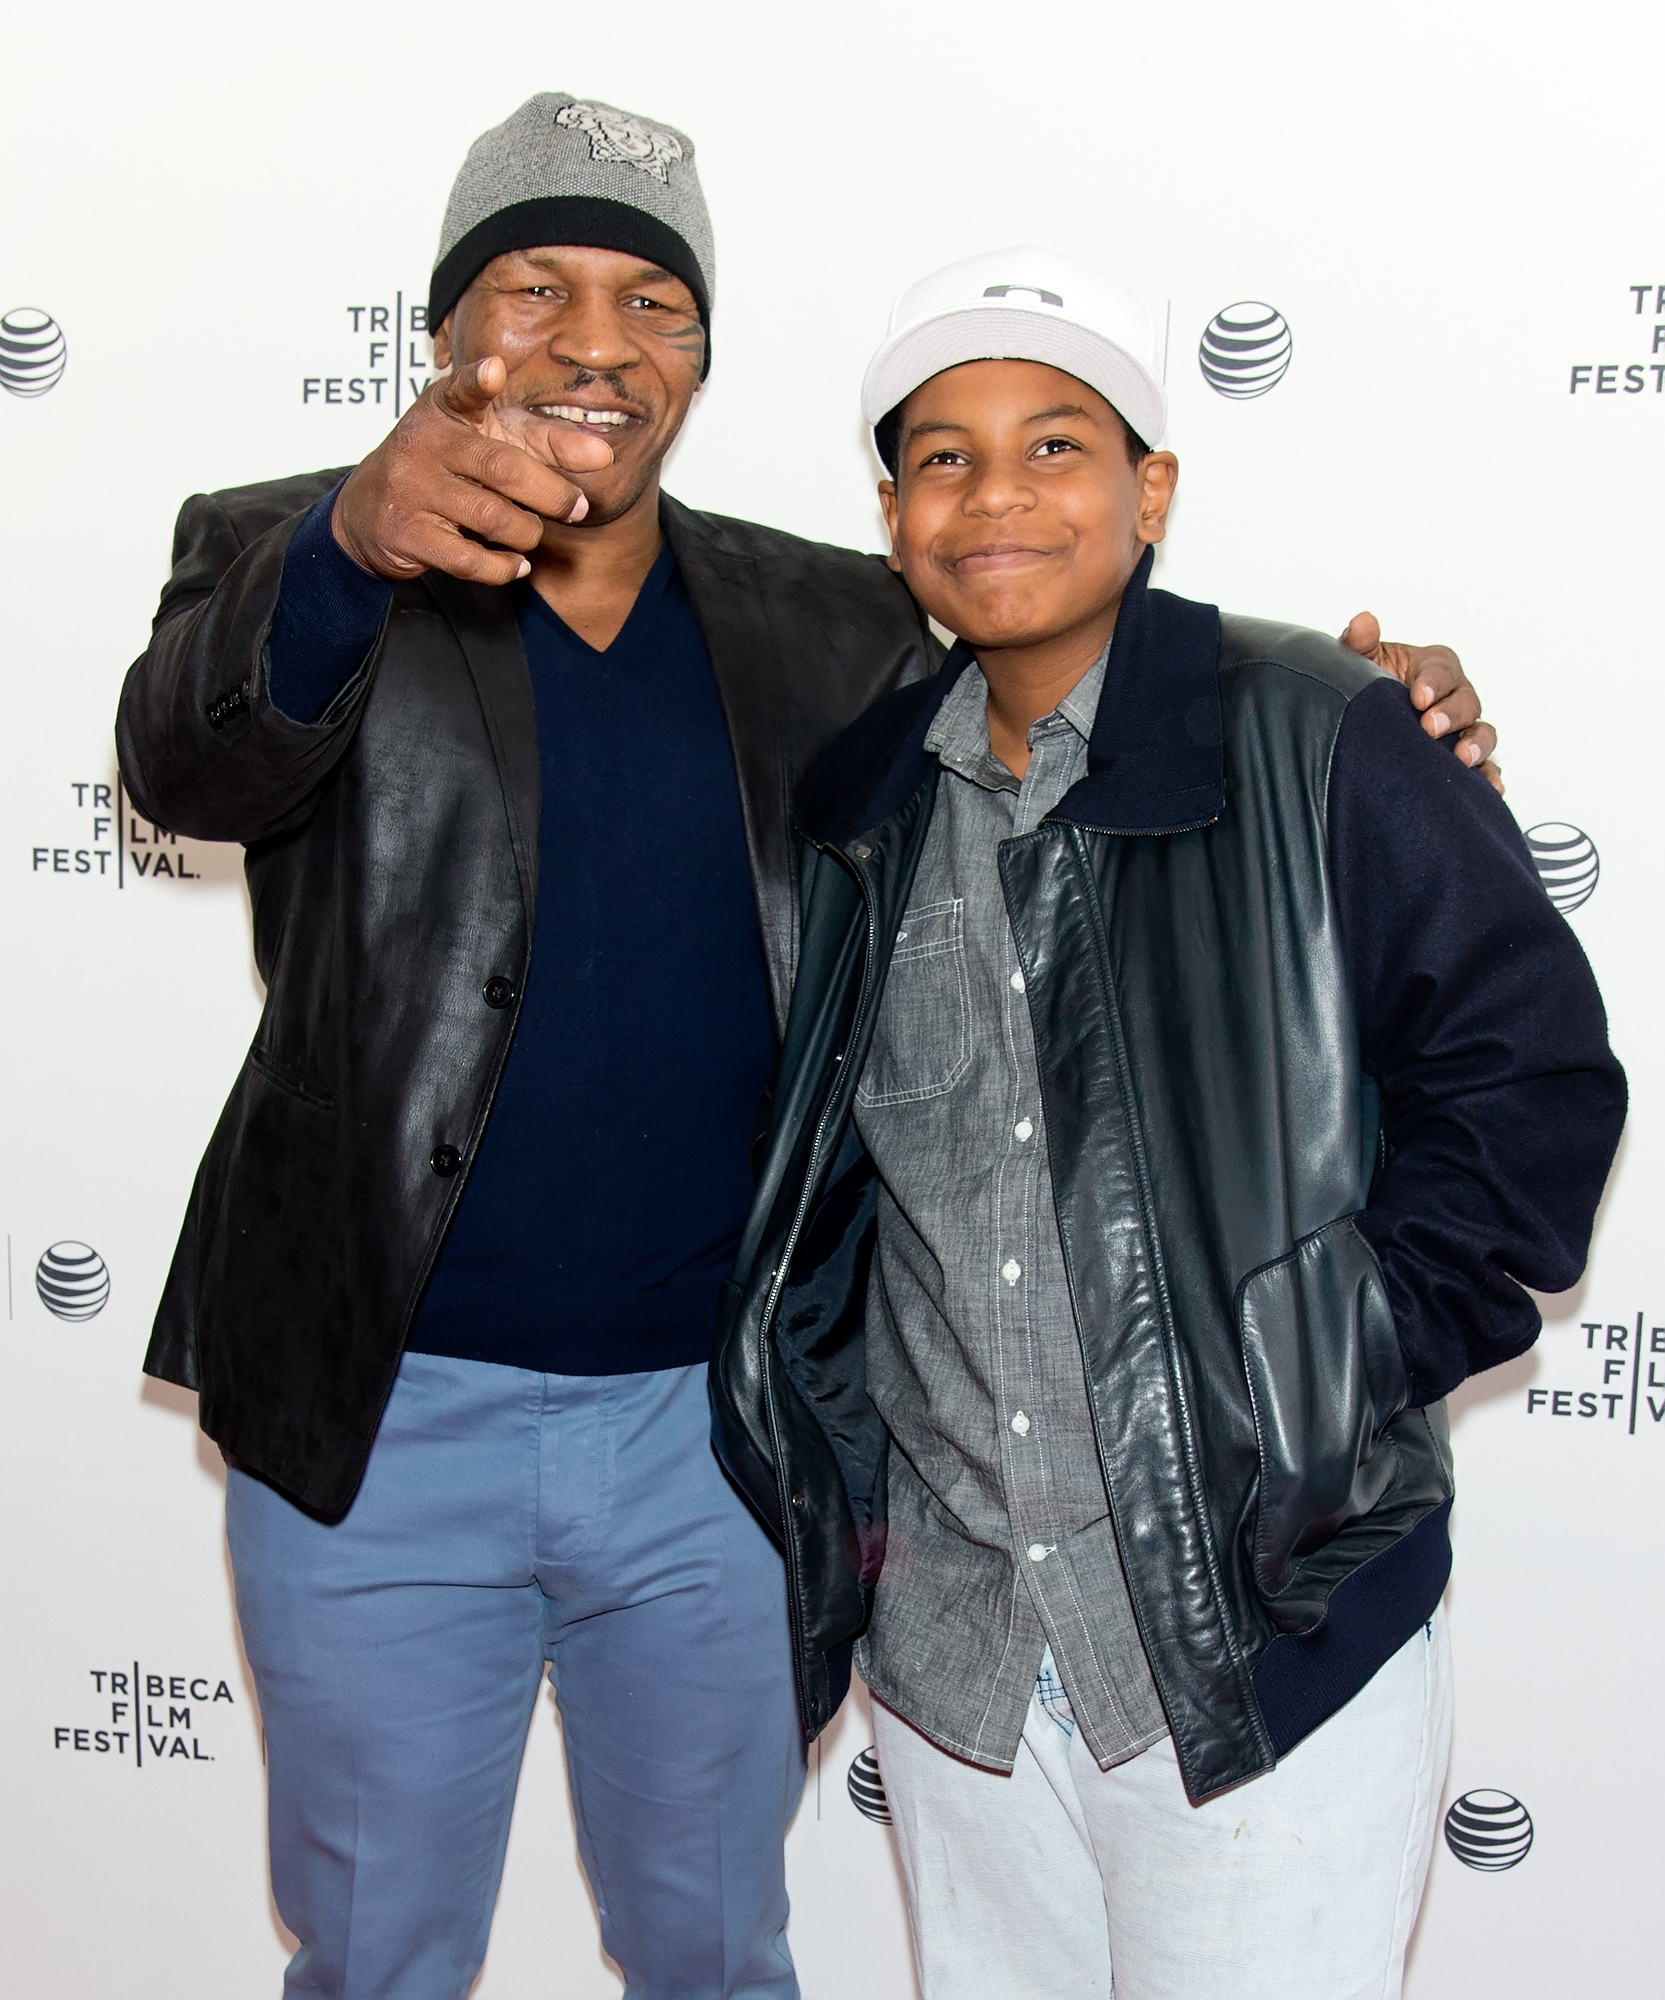 Mike Tyson and Miguel Tyson attend Tribeca Talks After the Movie: "Champs" during the 2014 Tribeca Film Festival at SVA Theater on April 19, 2014, in New York City. | Source: Getty Images